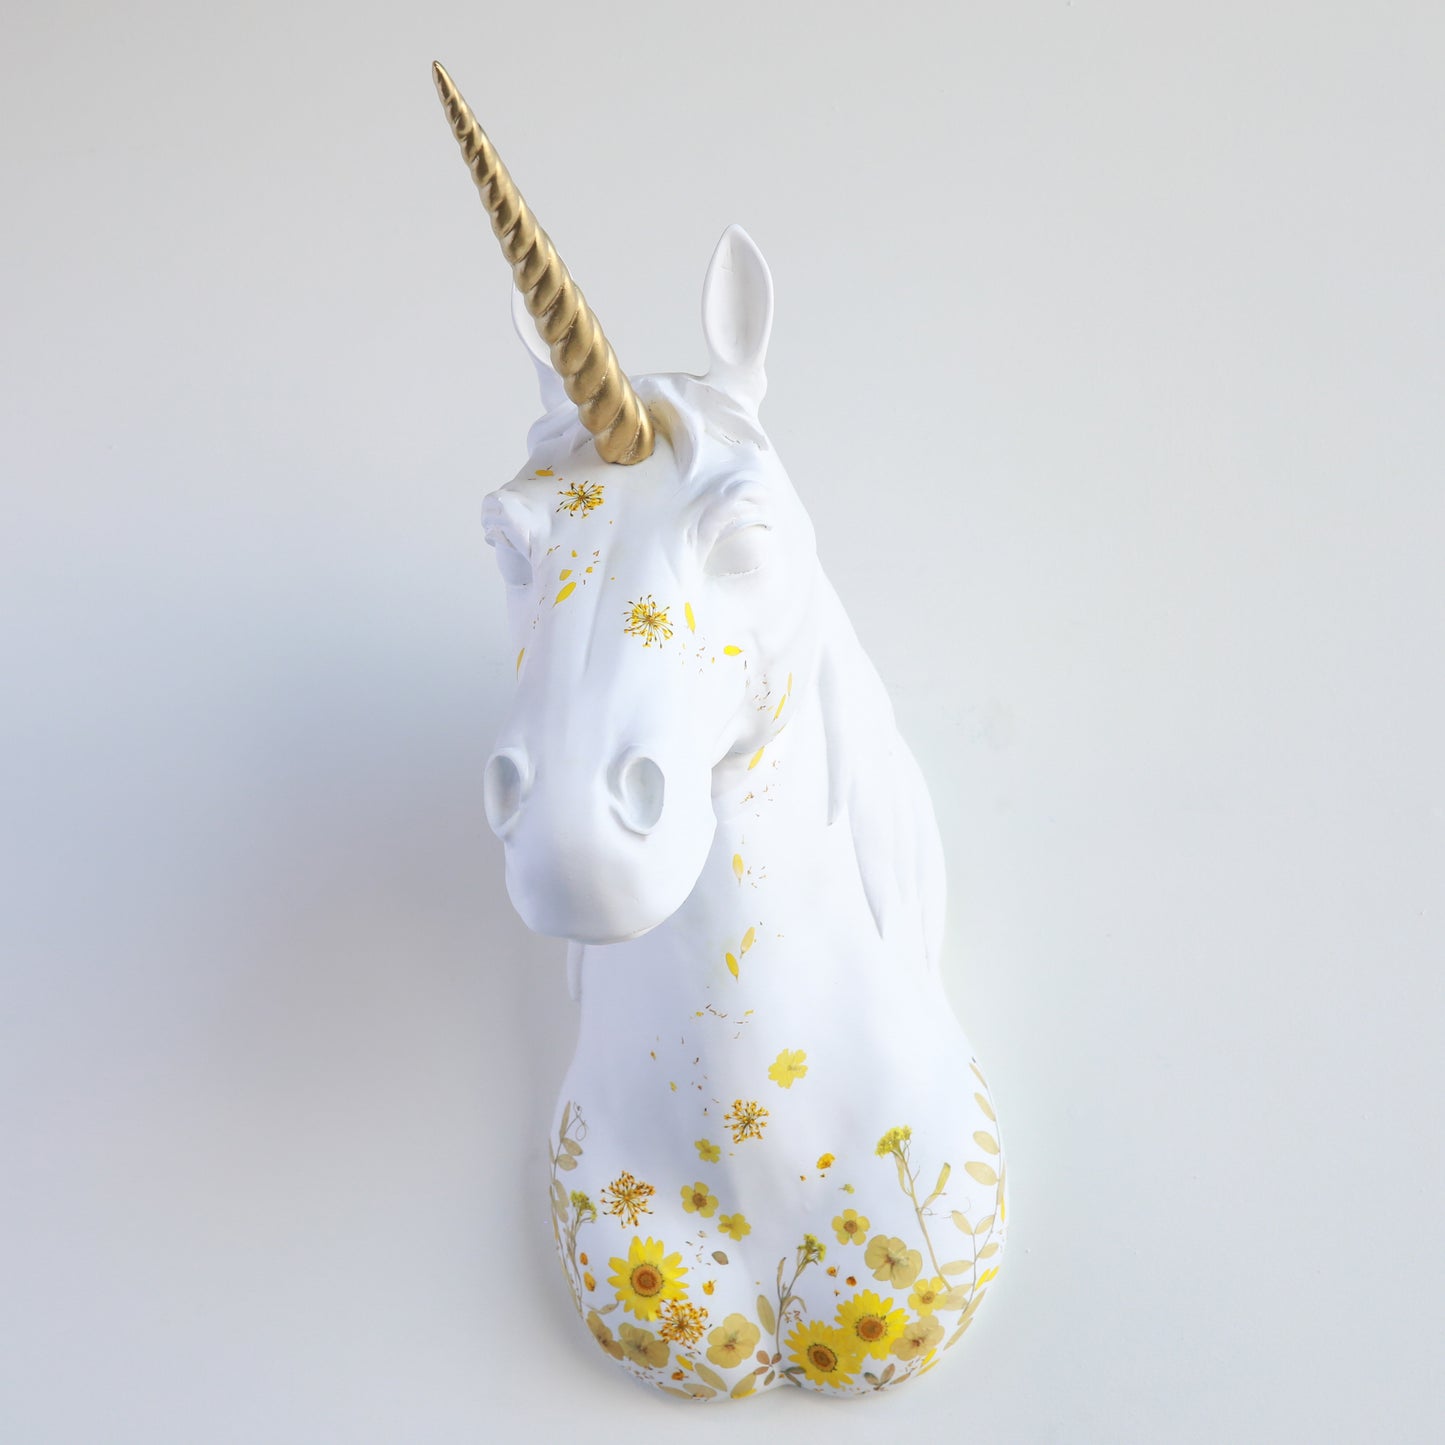 XL Unicorn Head Wall Mount // White and Gold with Pressed Flowers